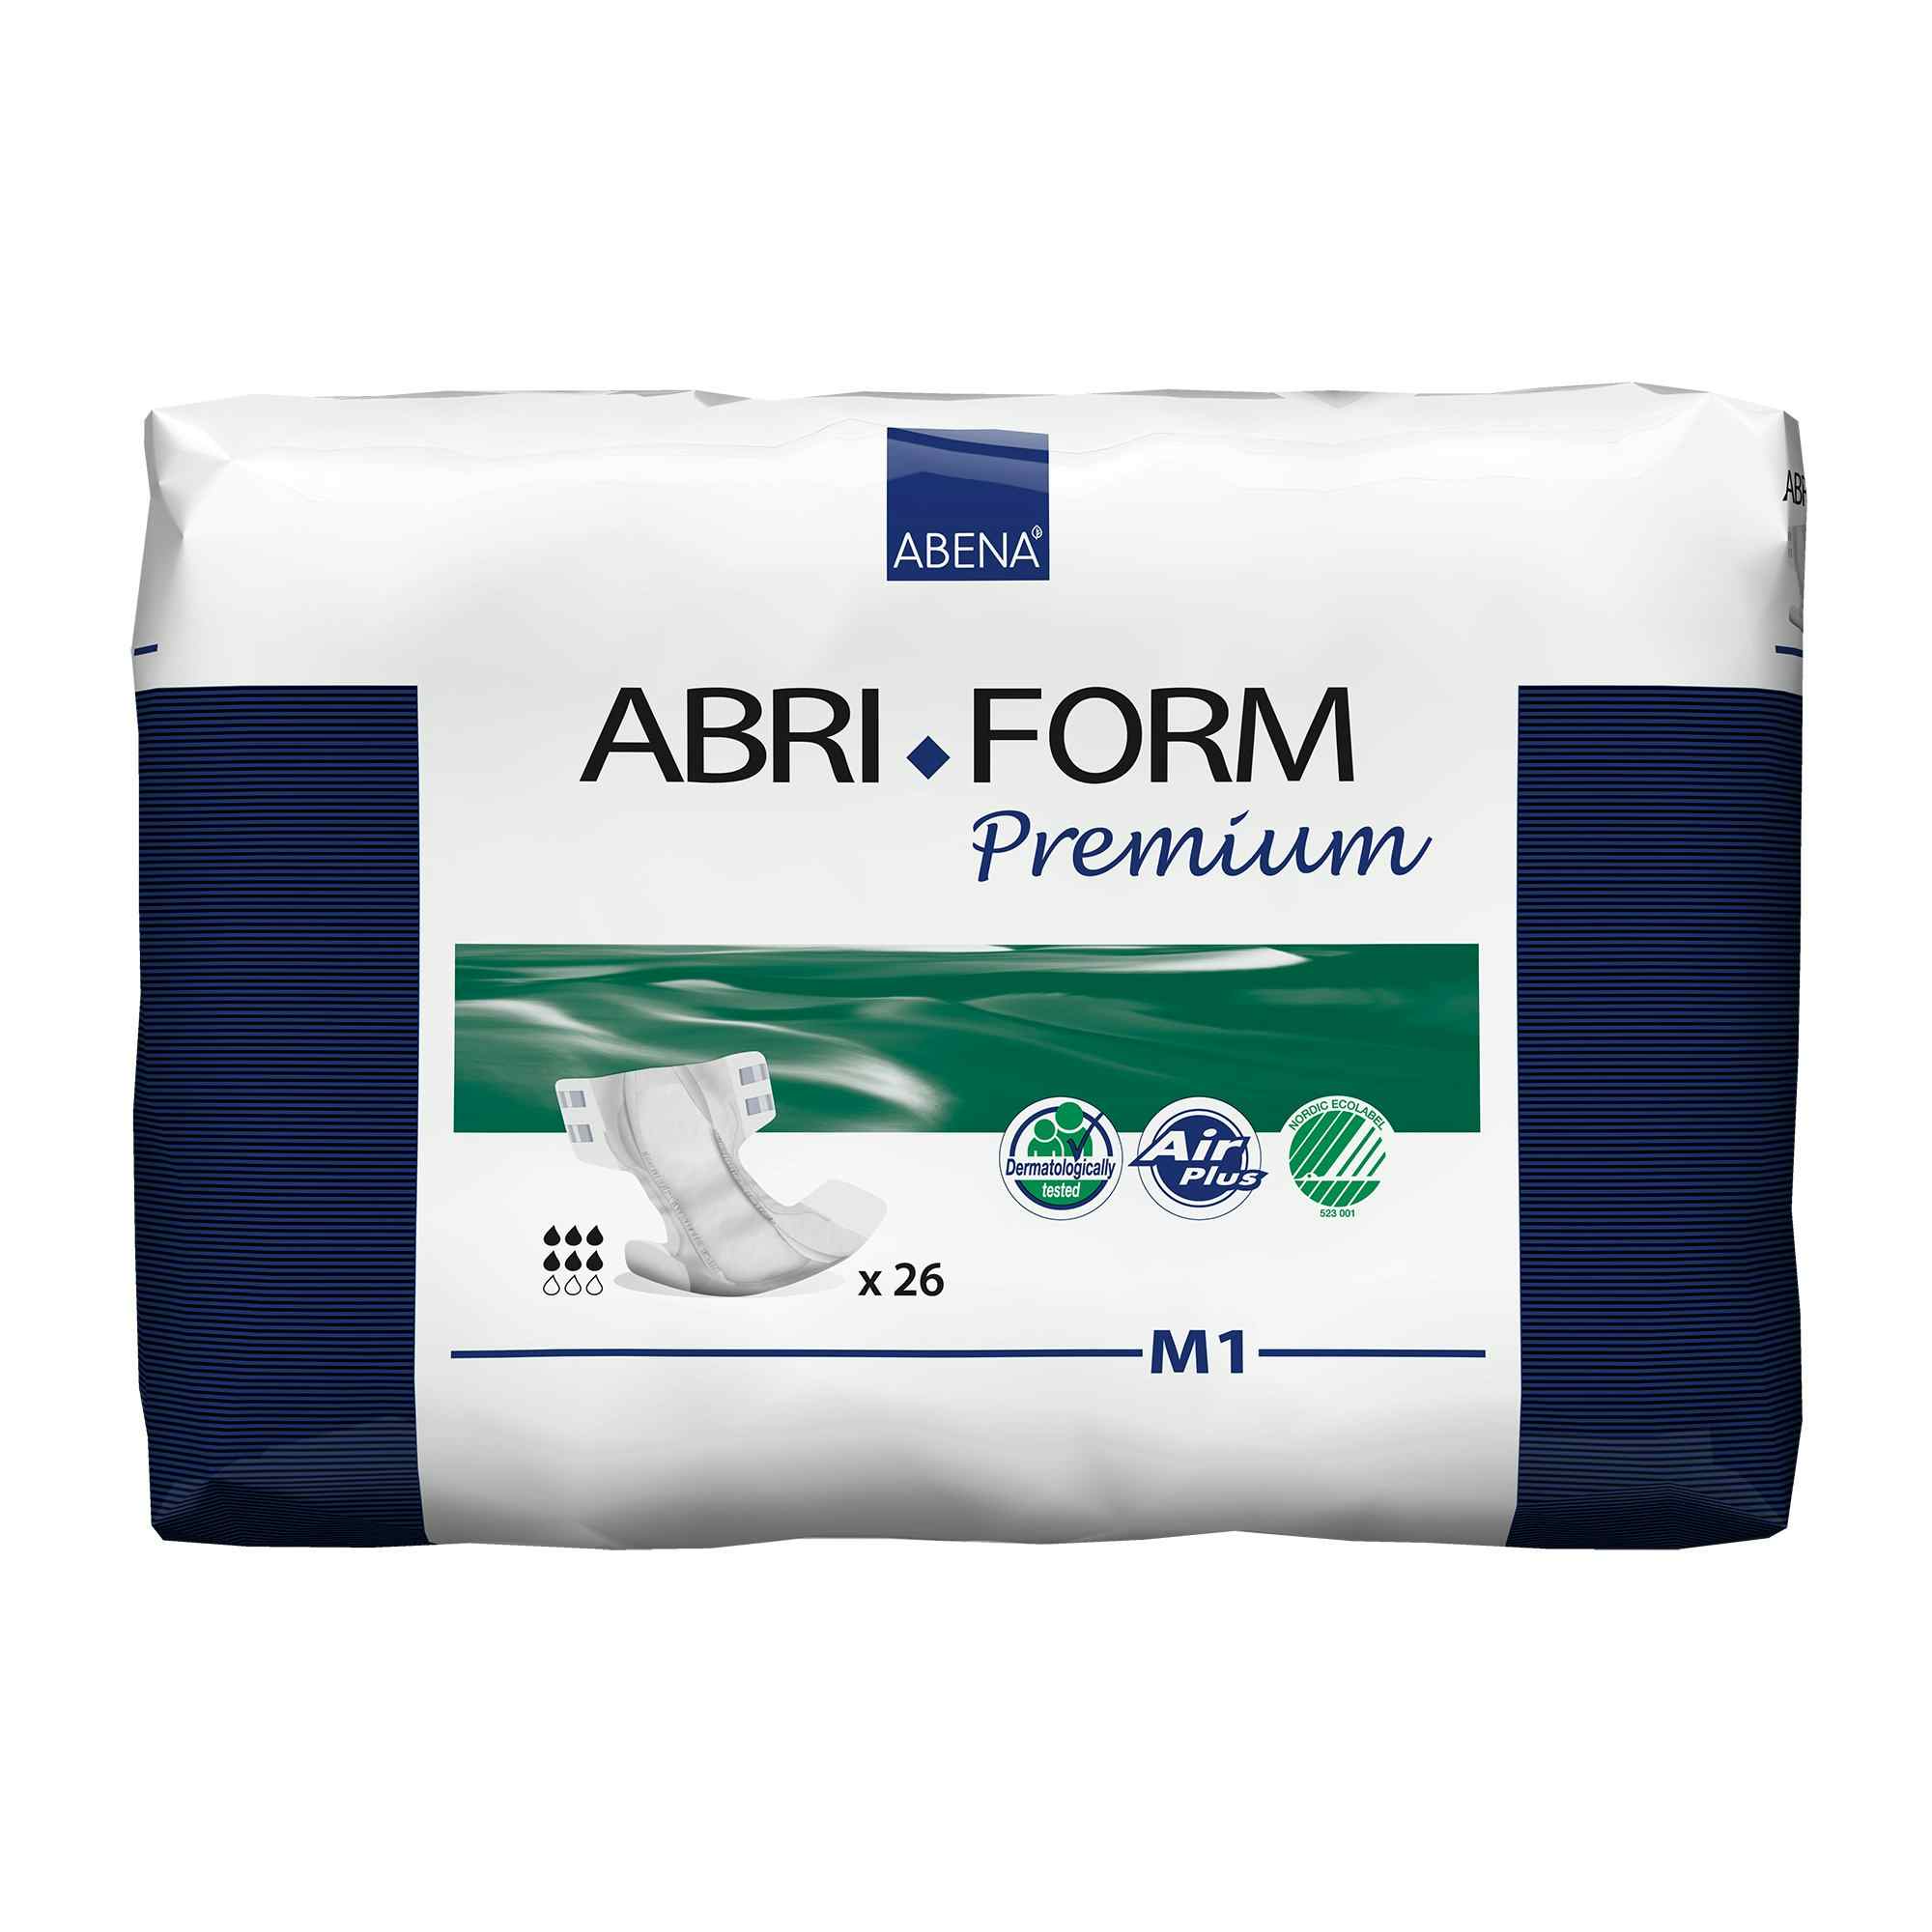 Abri-Form Premium M1 Unisex Adult Disposable Diaper with tabs, Moderate Absorbency, 43061, Medium (28-44") - Case of 104 Diapers (4 Bags)